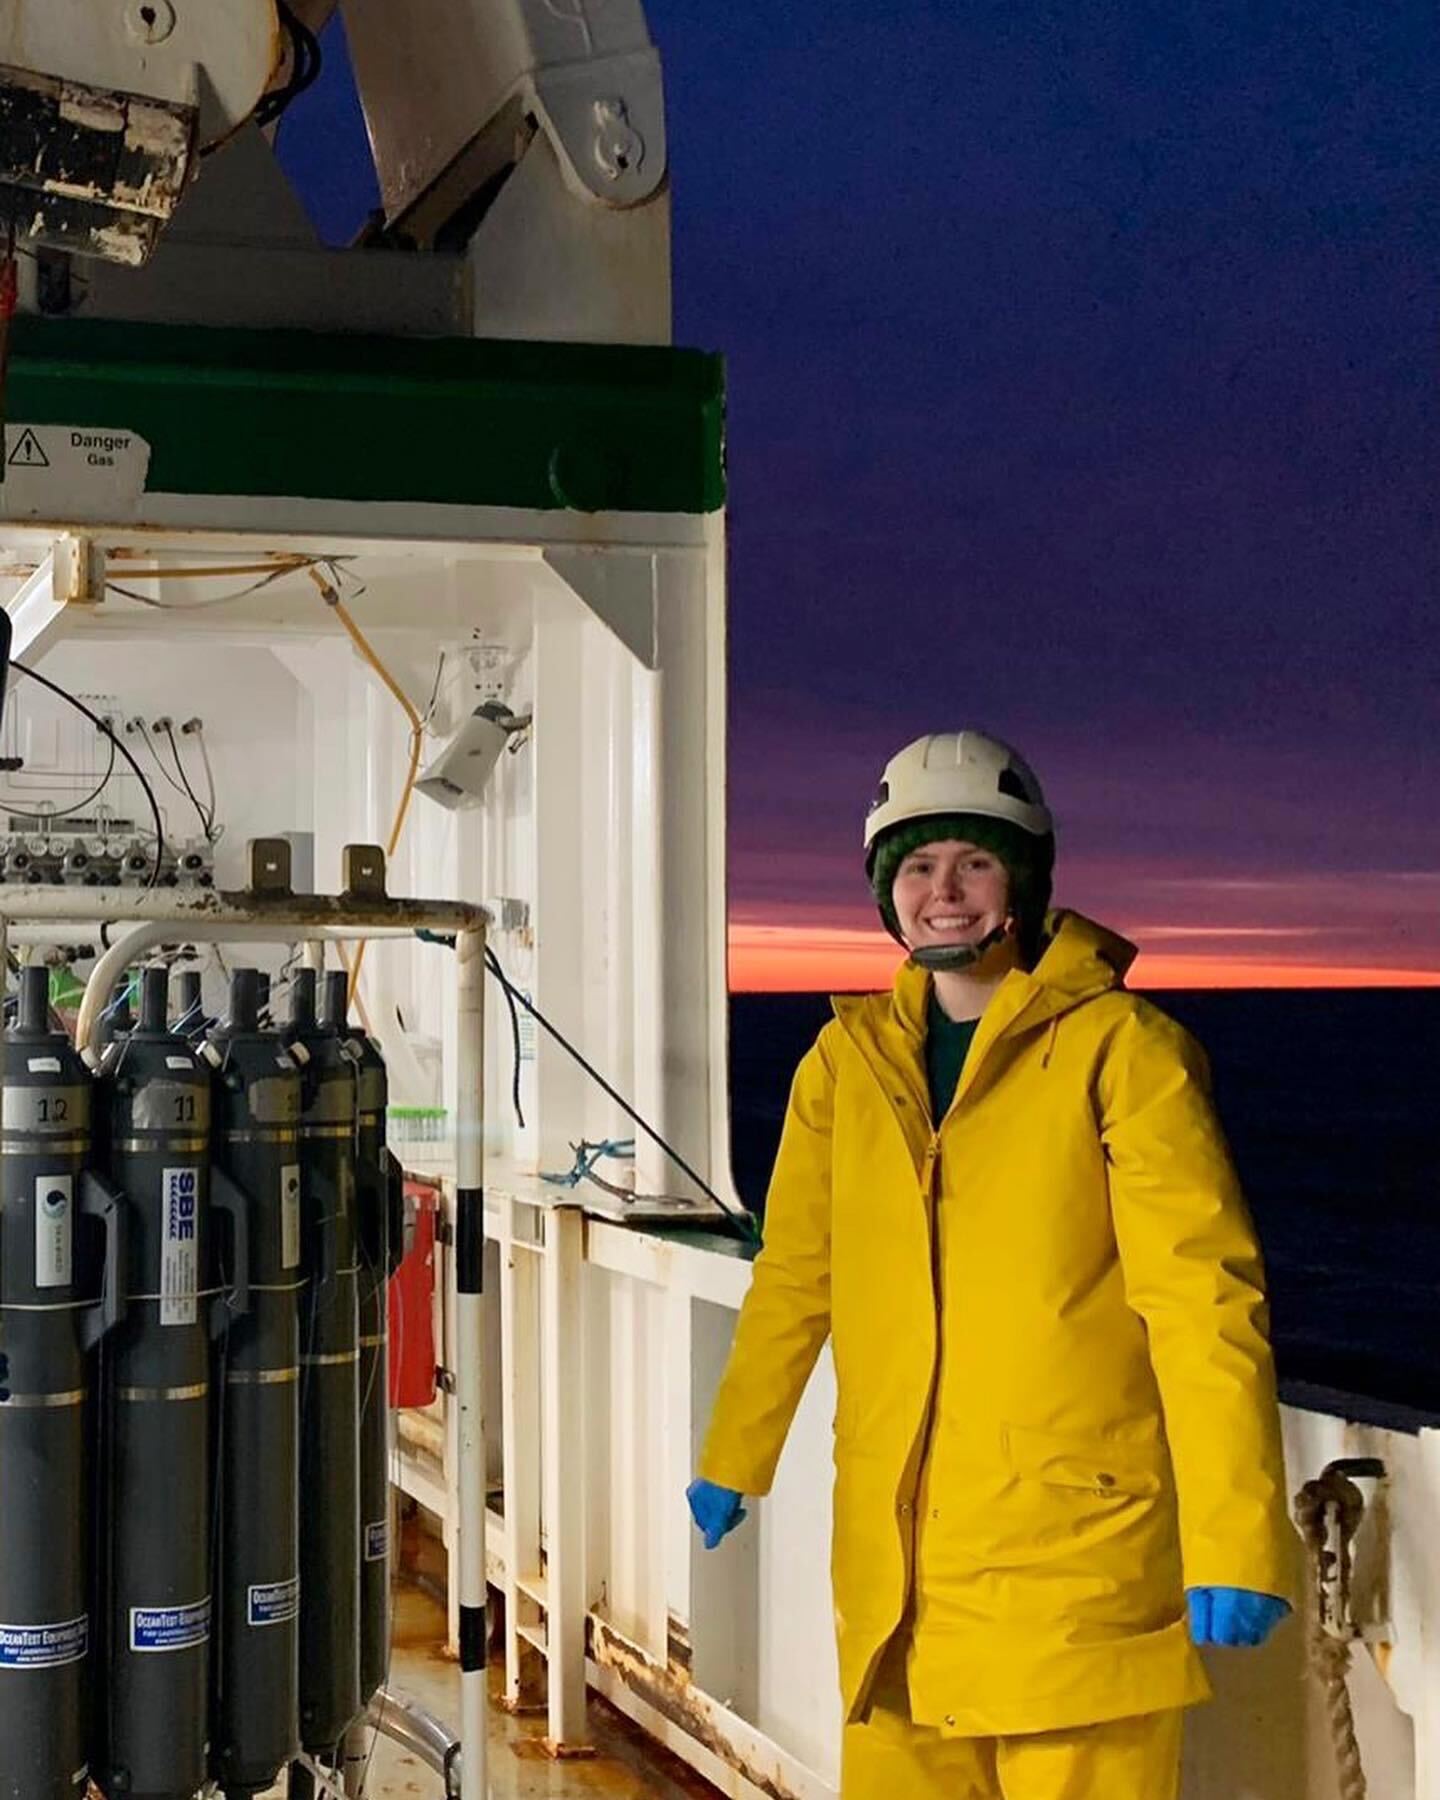 A student wearing a yellow coat and helmet stands on a ship's deck with the ocean and a sunset behind her